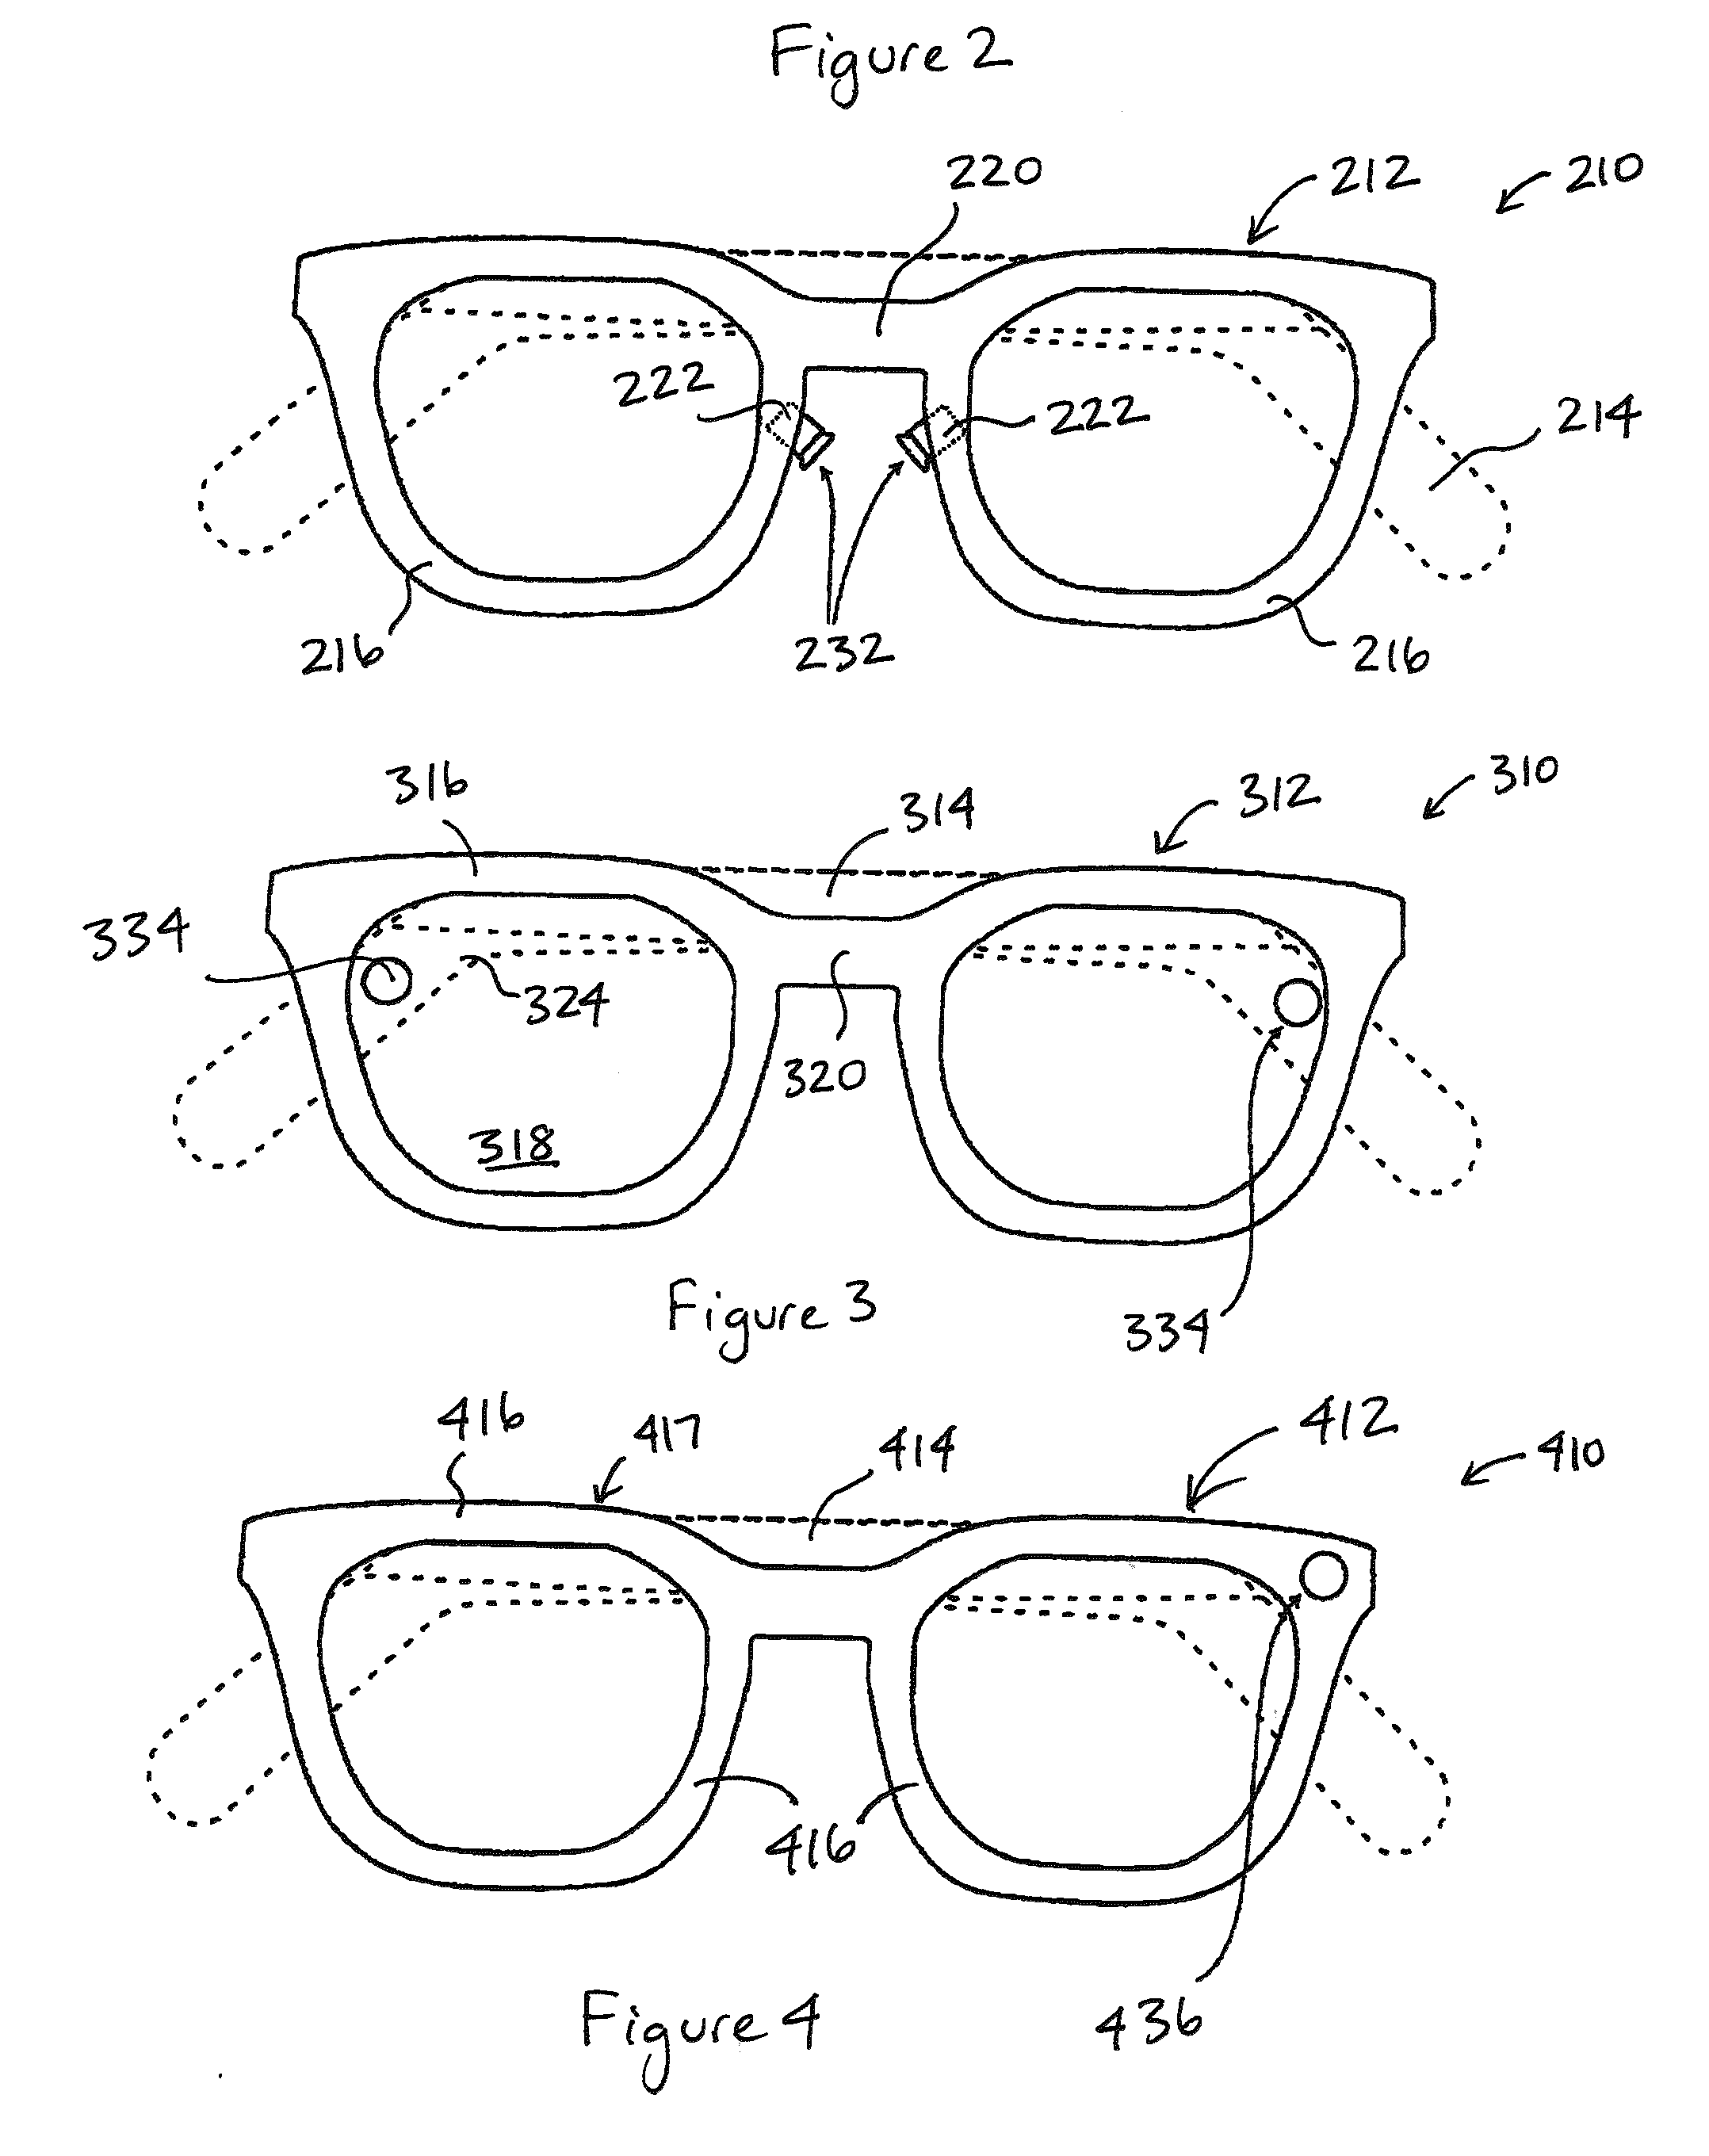 System and apparatus for eyeglass appliance platform